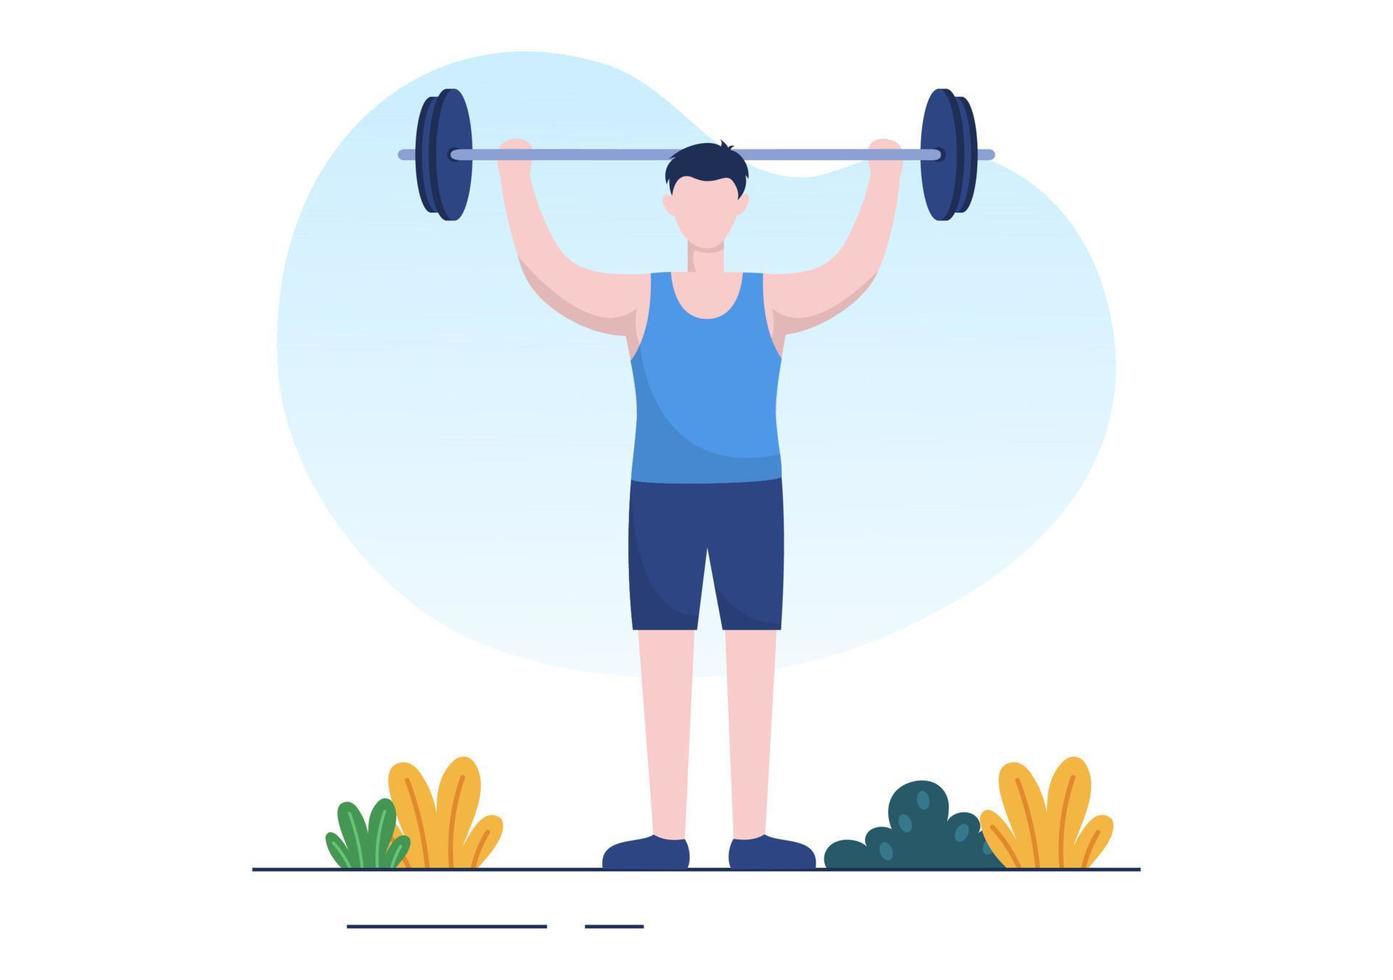 Workout Gym People Exercising Lifting Dumbbells and Weight, Jogging on Treadmill, Sport, Wellness or Fitness in Flat Poster Background illustration vector